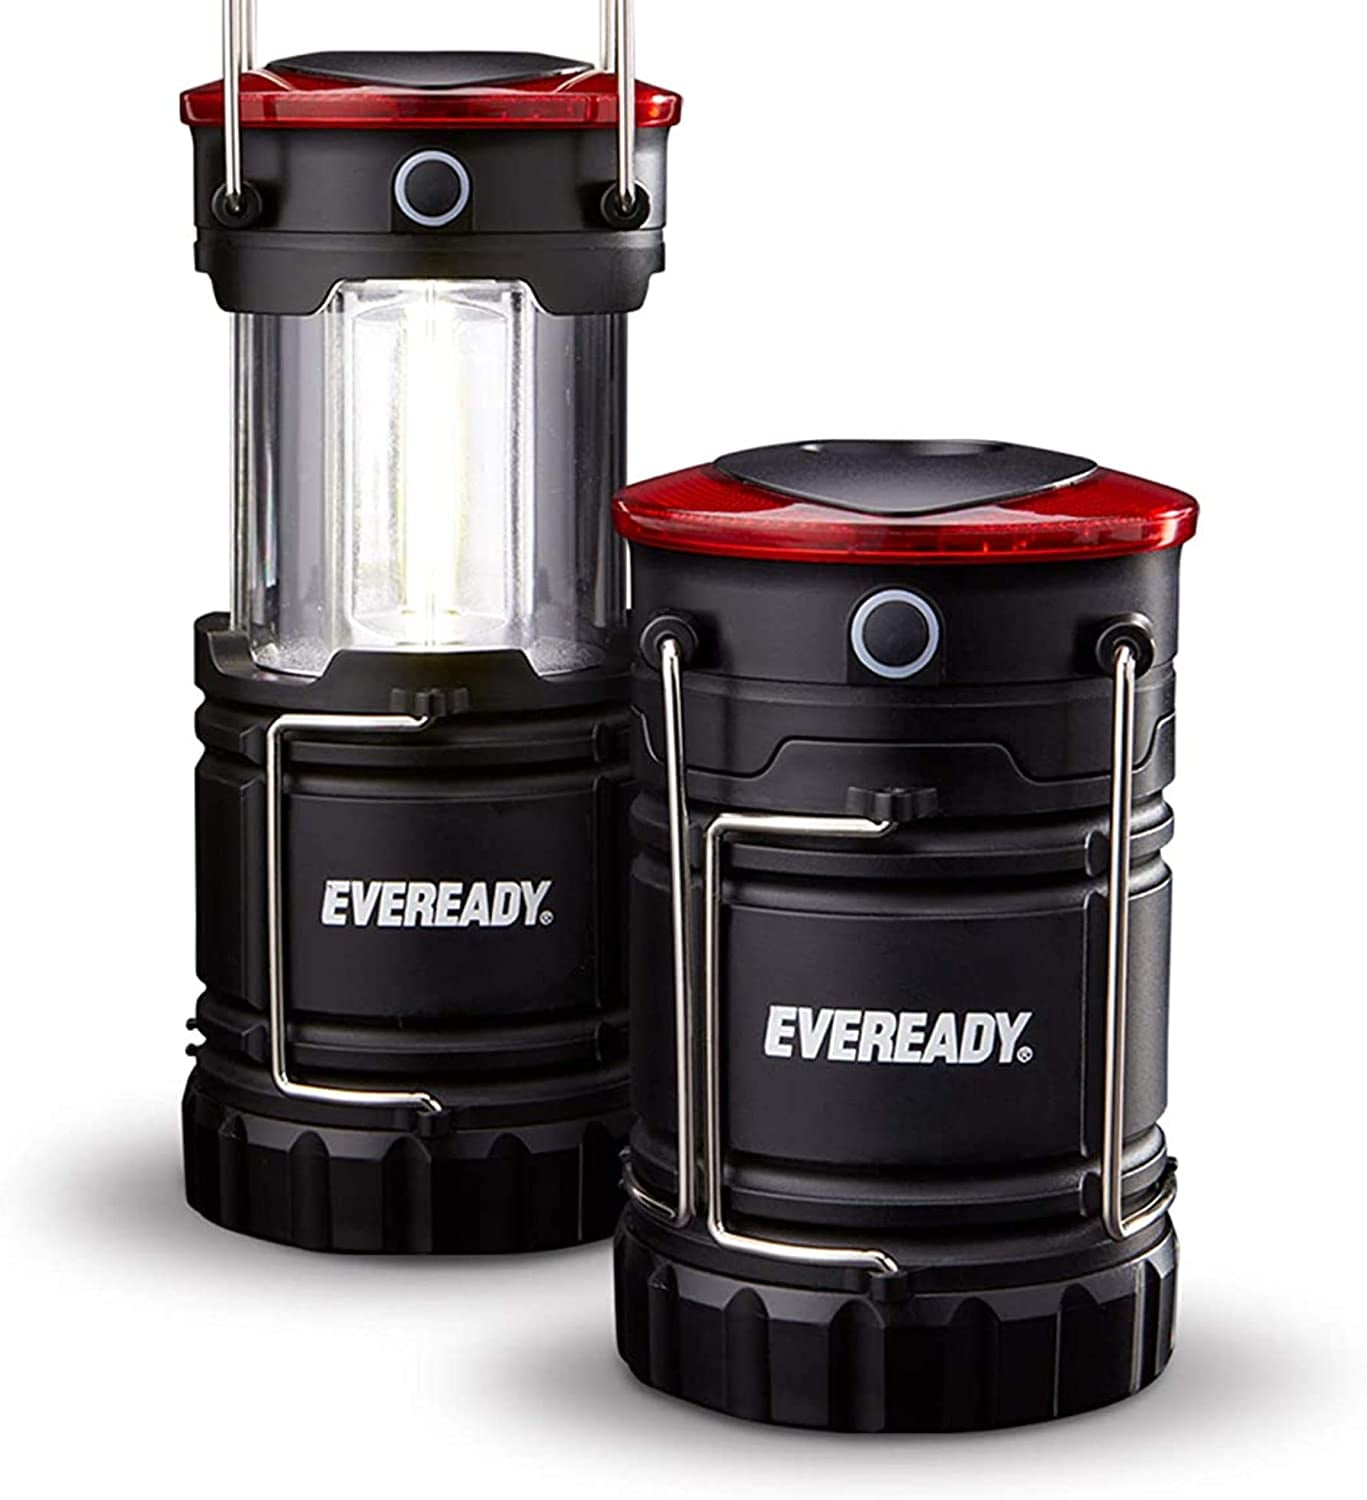 ENERGIZER LED Camping Lantern 360 PRO, IPX4 Water Resistant Tent Light,  Ultra Bright Battery Powered Lanterns for Camping, Outdoors, Emergency  Power Outage